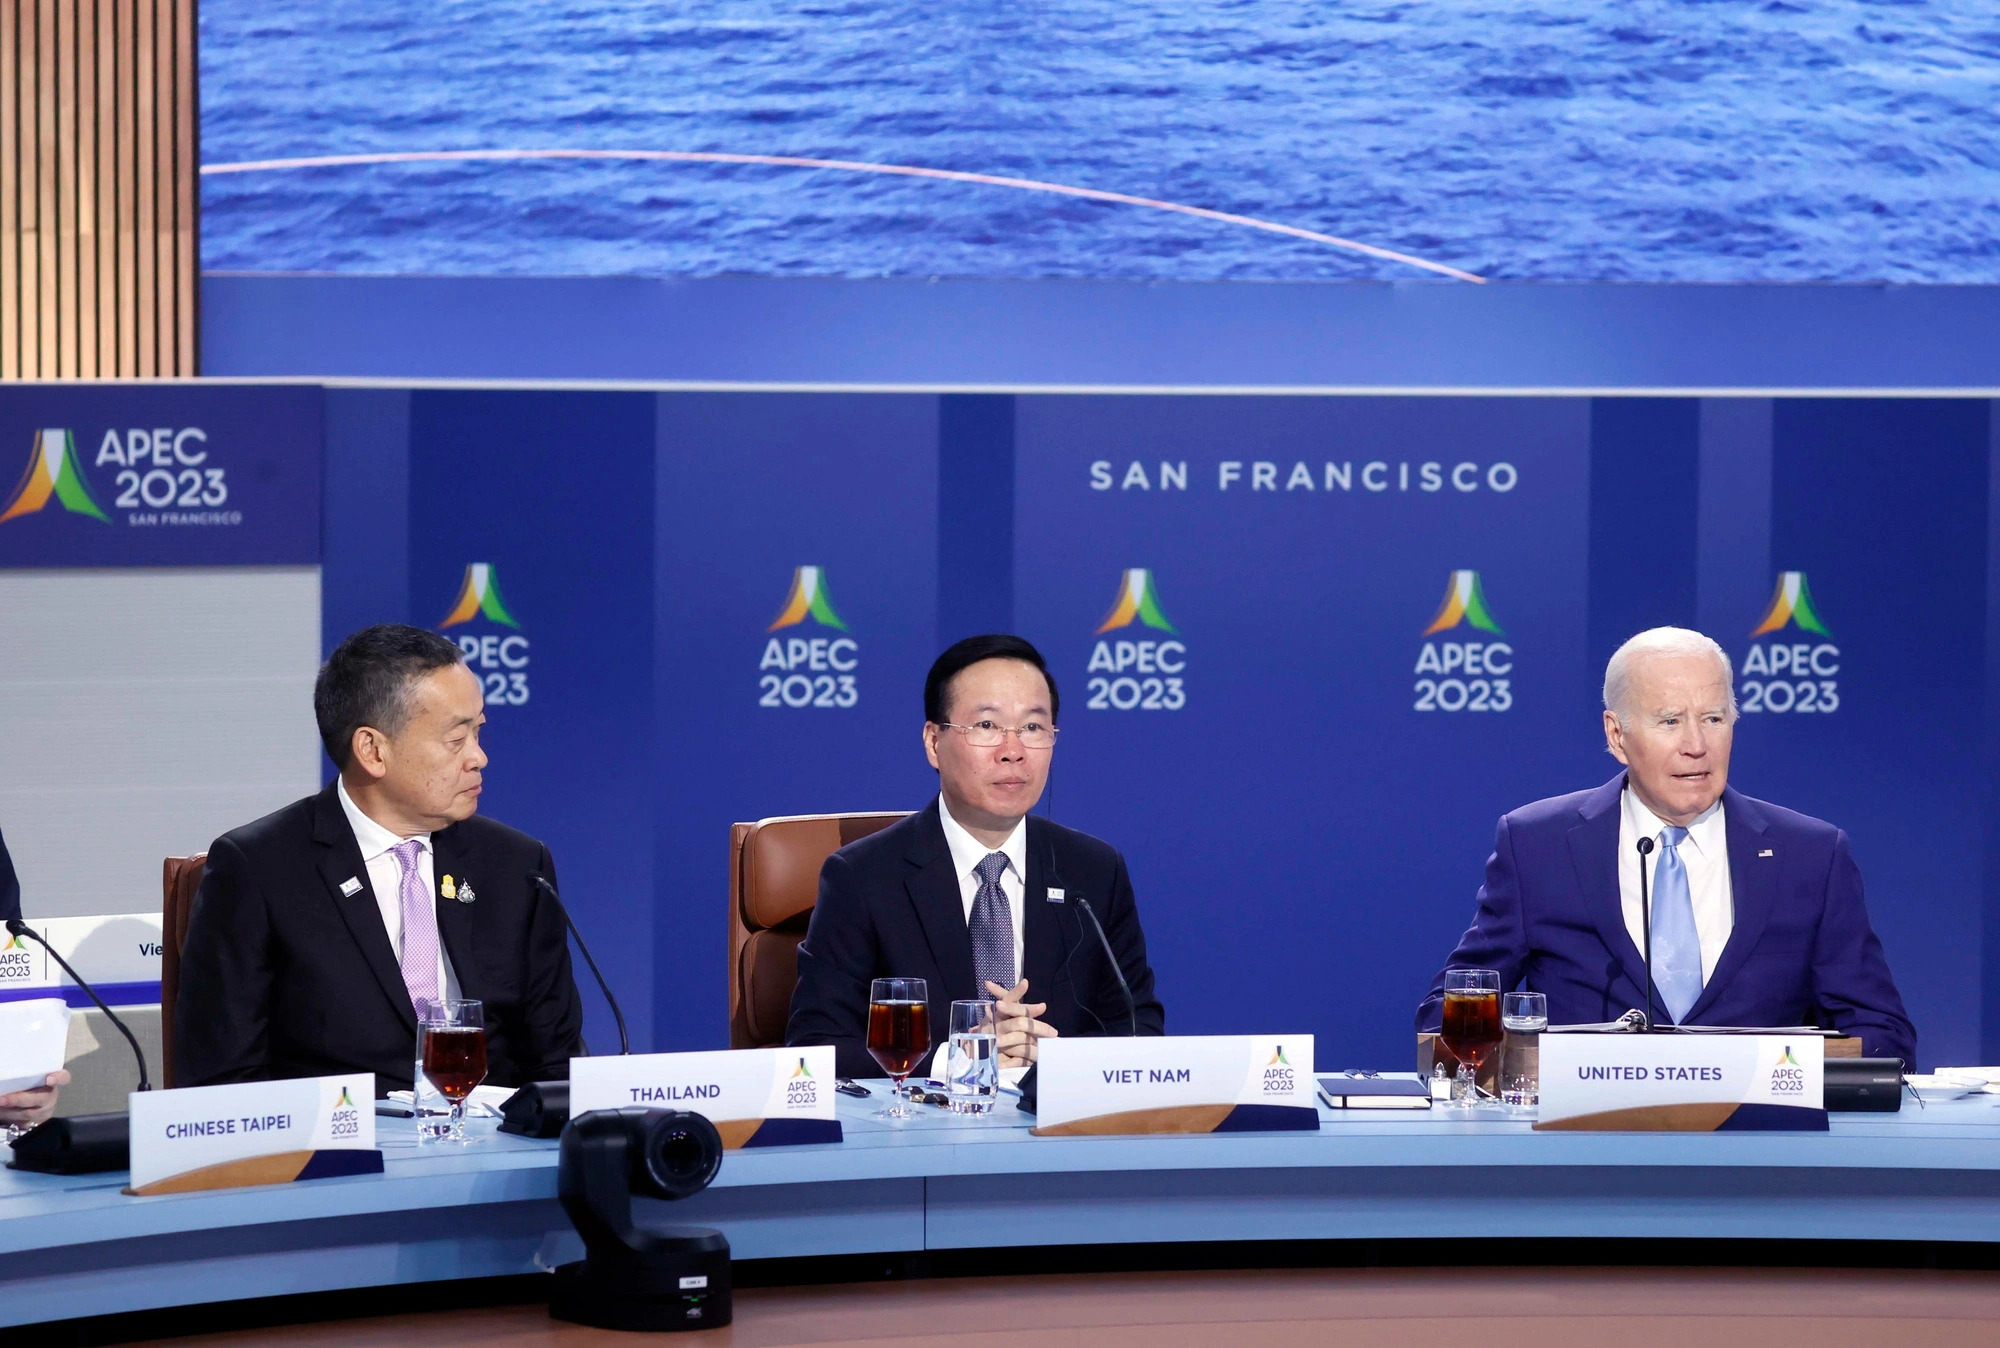 Vietnamese State President Vo Van Thuong (C) sits next to his U.S. counterpart Joe Biden (R) at a session of the APEC Leaders’ Week 2023 in San Francisco, November 16, 2023 (U.S. time). Photo: Vietnam News Agency